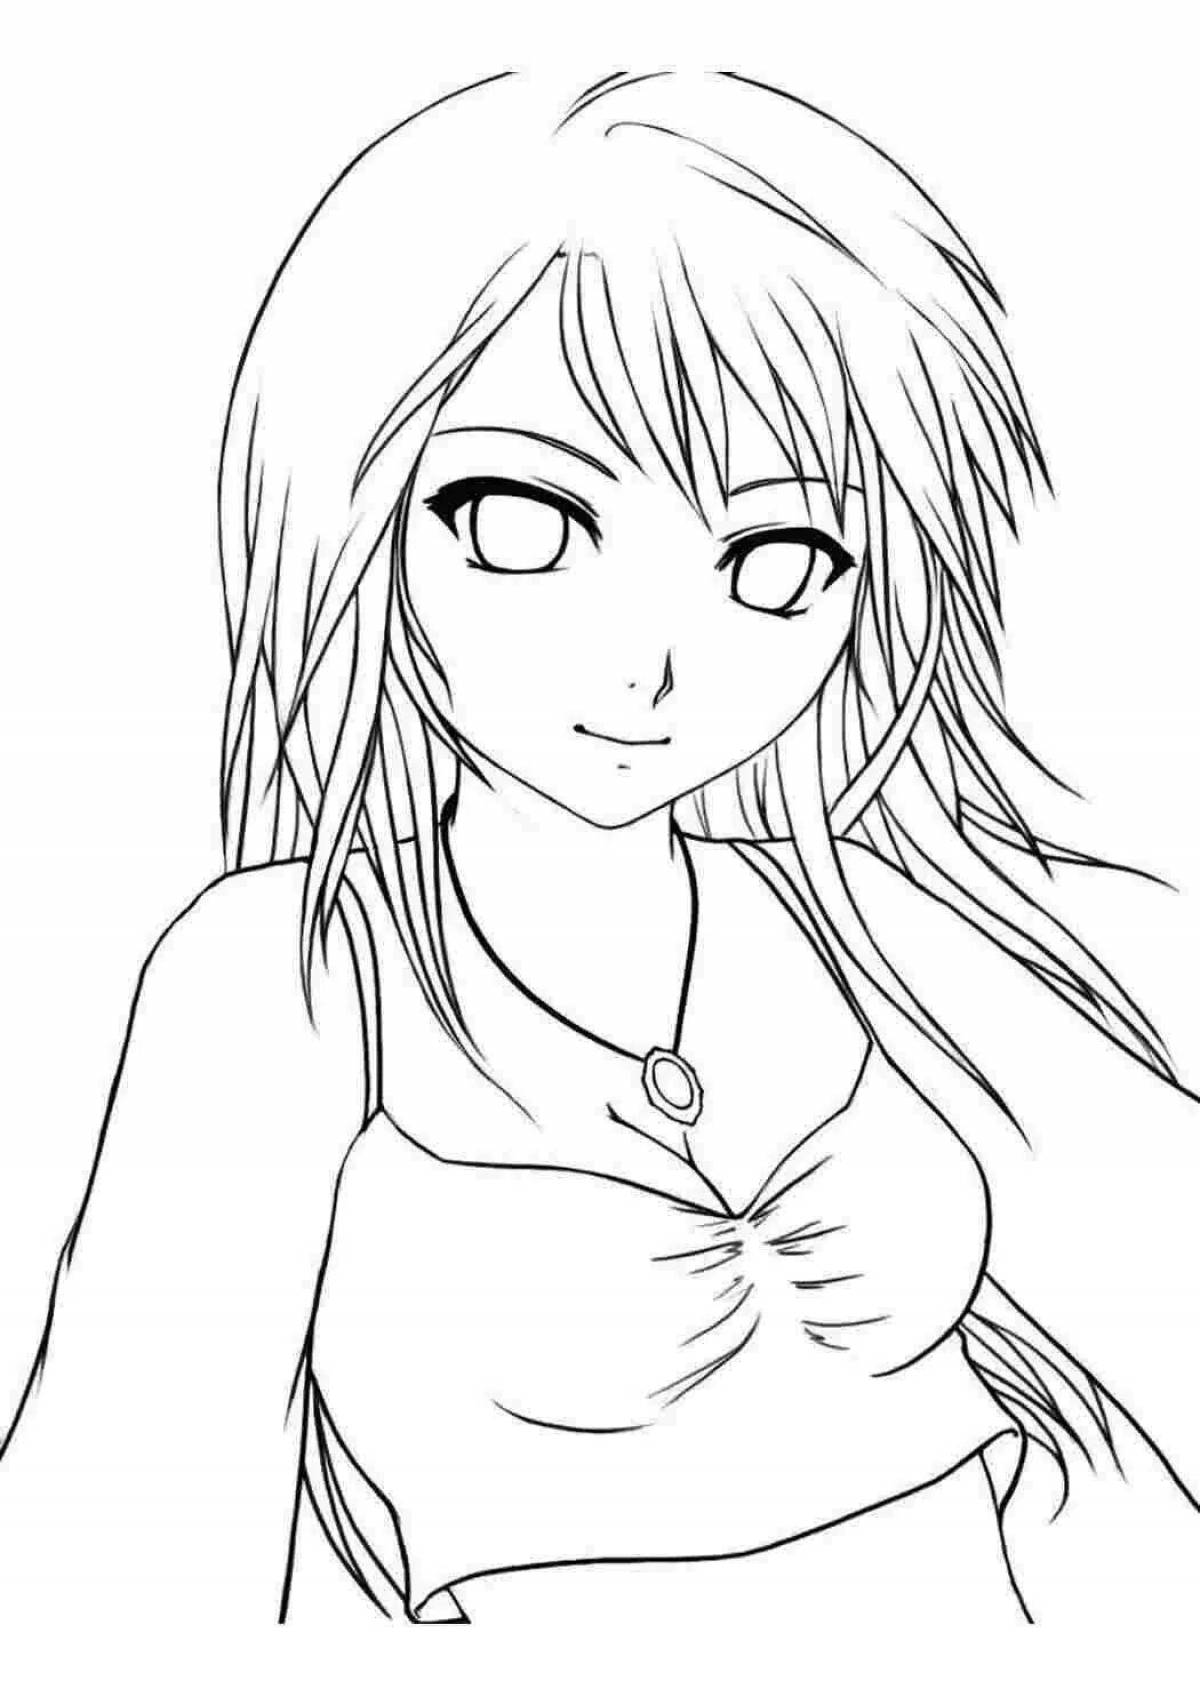 Coloring page of the dazzling wife